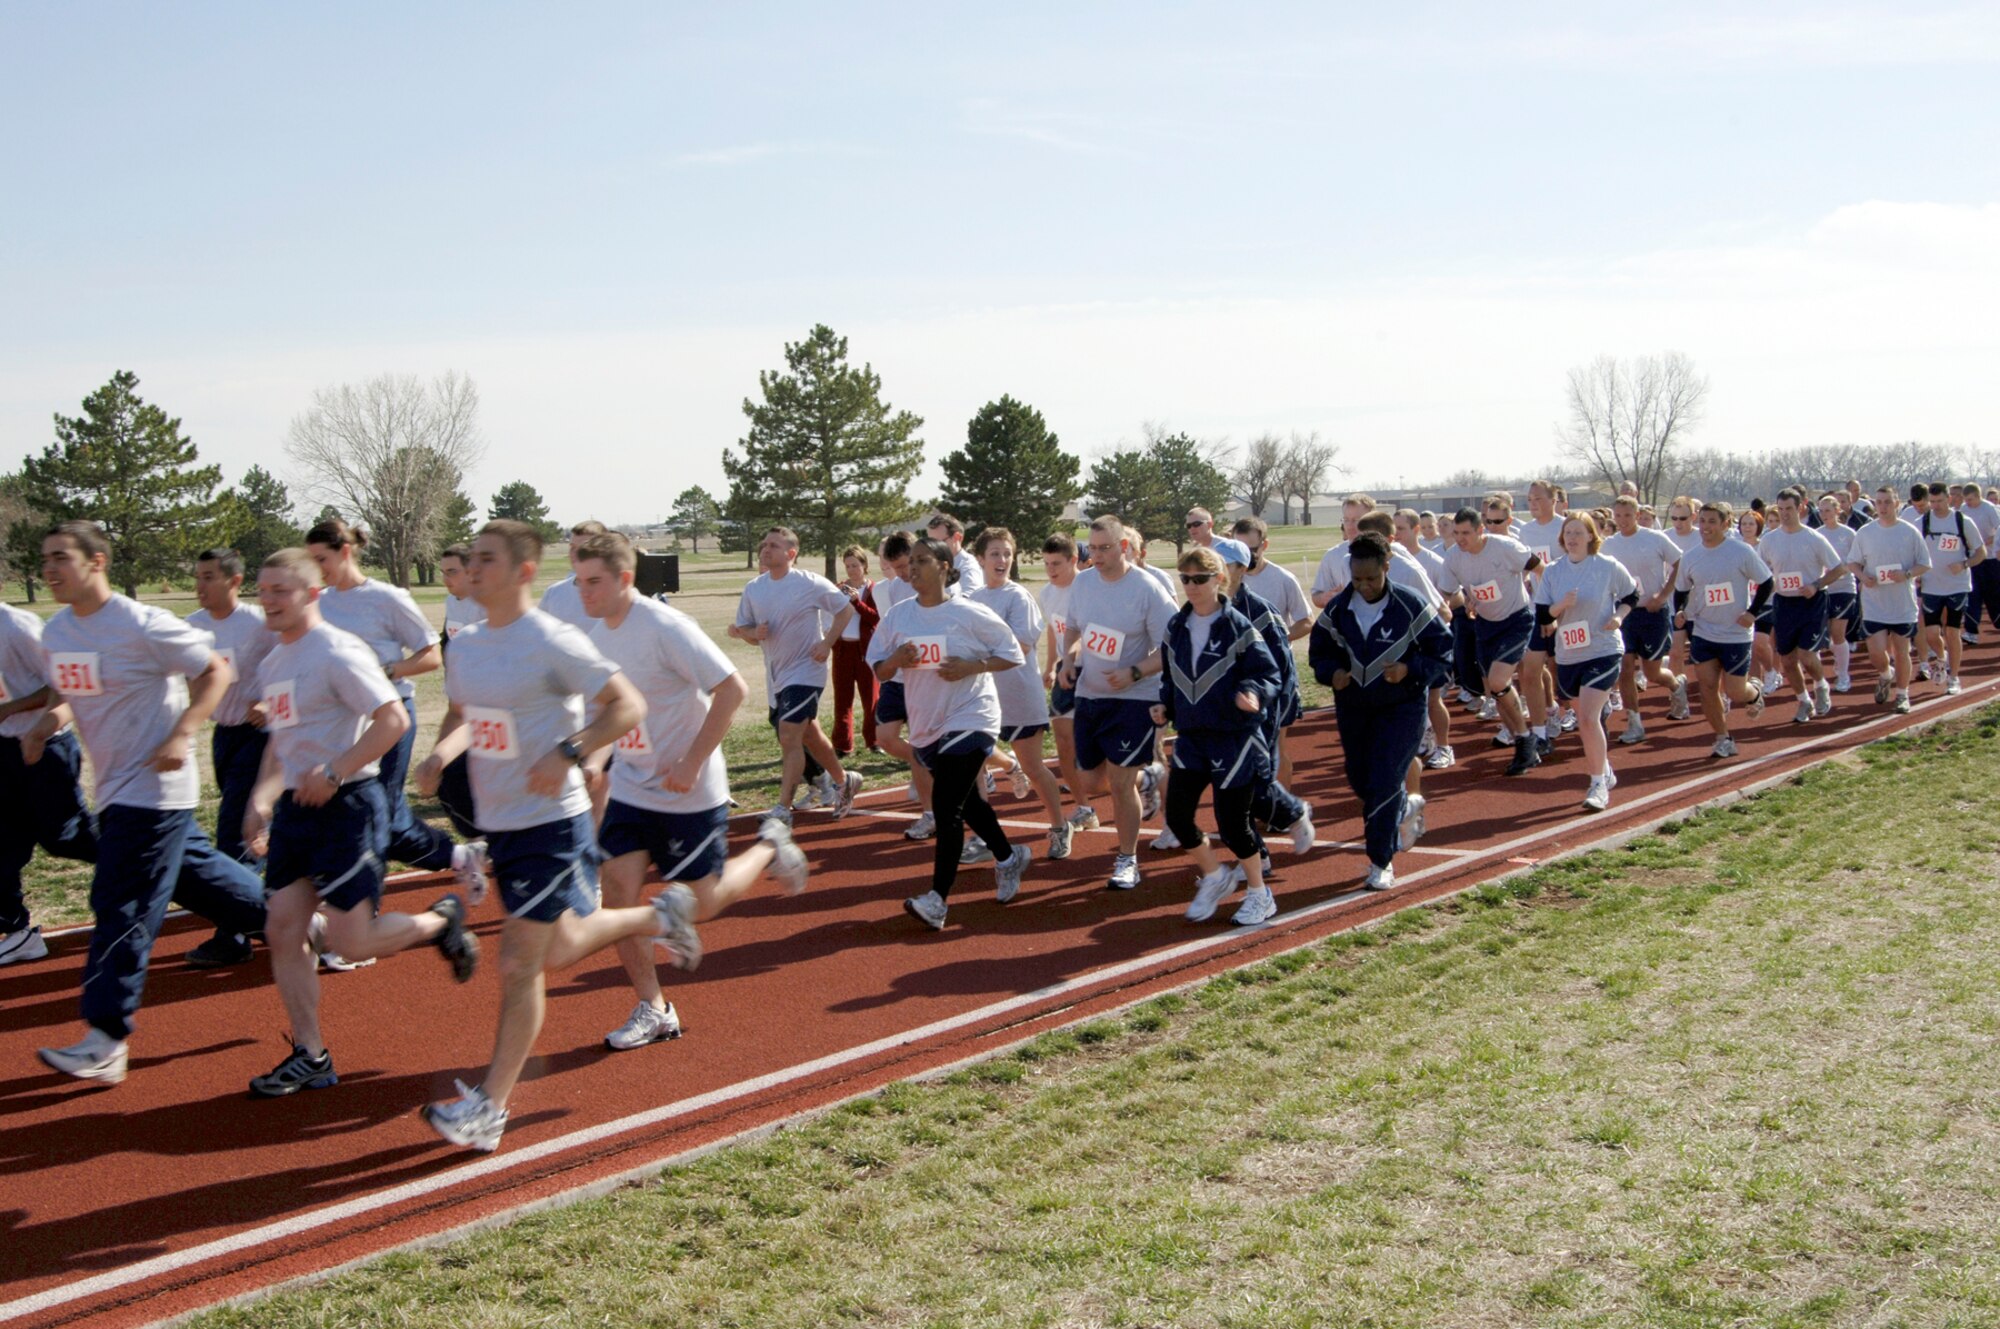 Team McConnell members participate in a 5K run on base, March 16, in honor of this year's Air Force Assistance Fund campaign, which began Feb. 12 and will run through May 4. The AFAF offers Airmen an opportunity to contribute to any of the four official Air Force charitable organizations. (Air Force photo by Senior Airman Jamie Train)